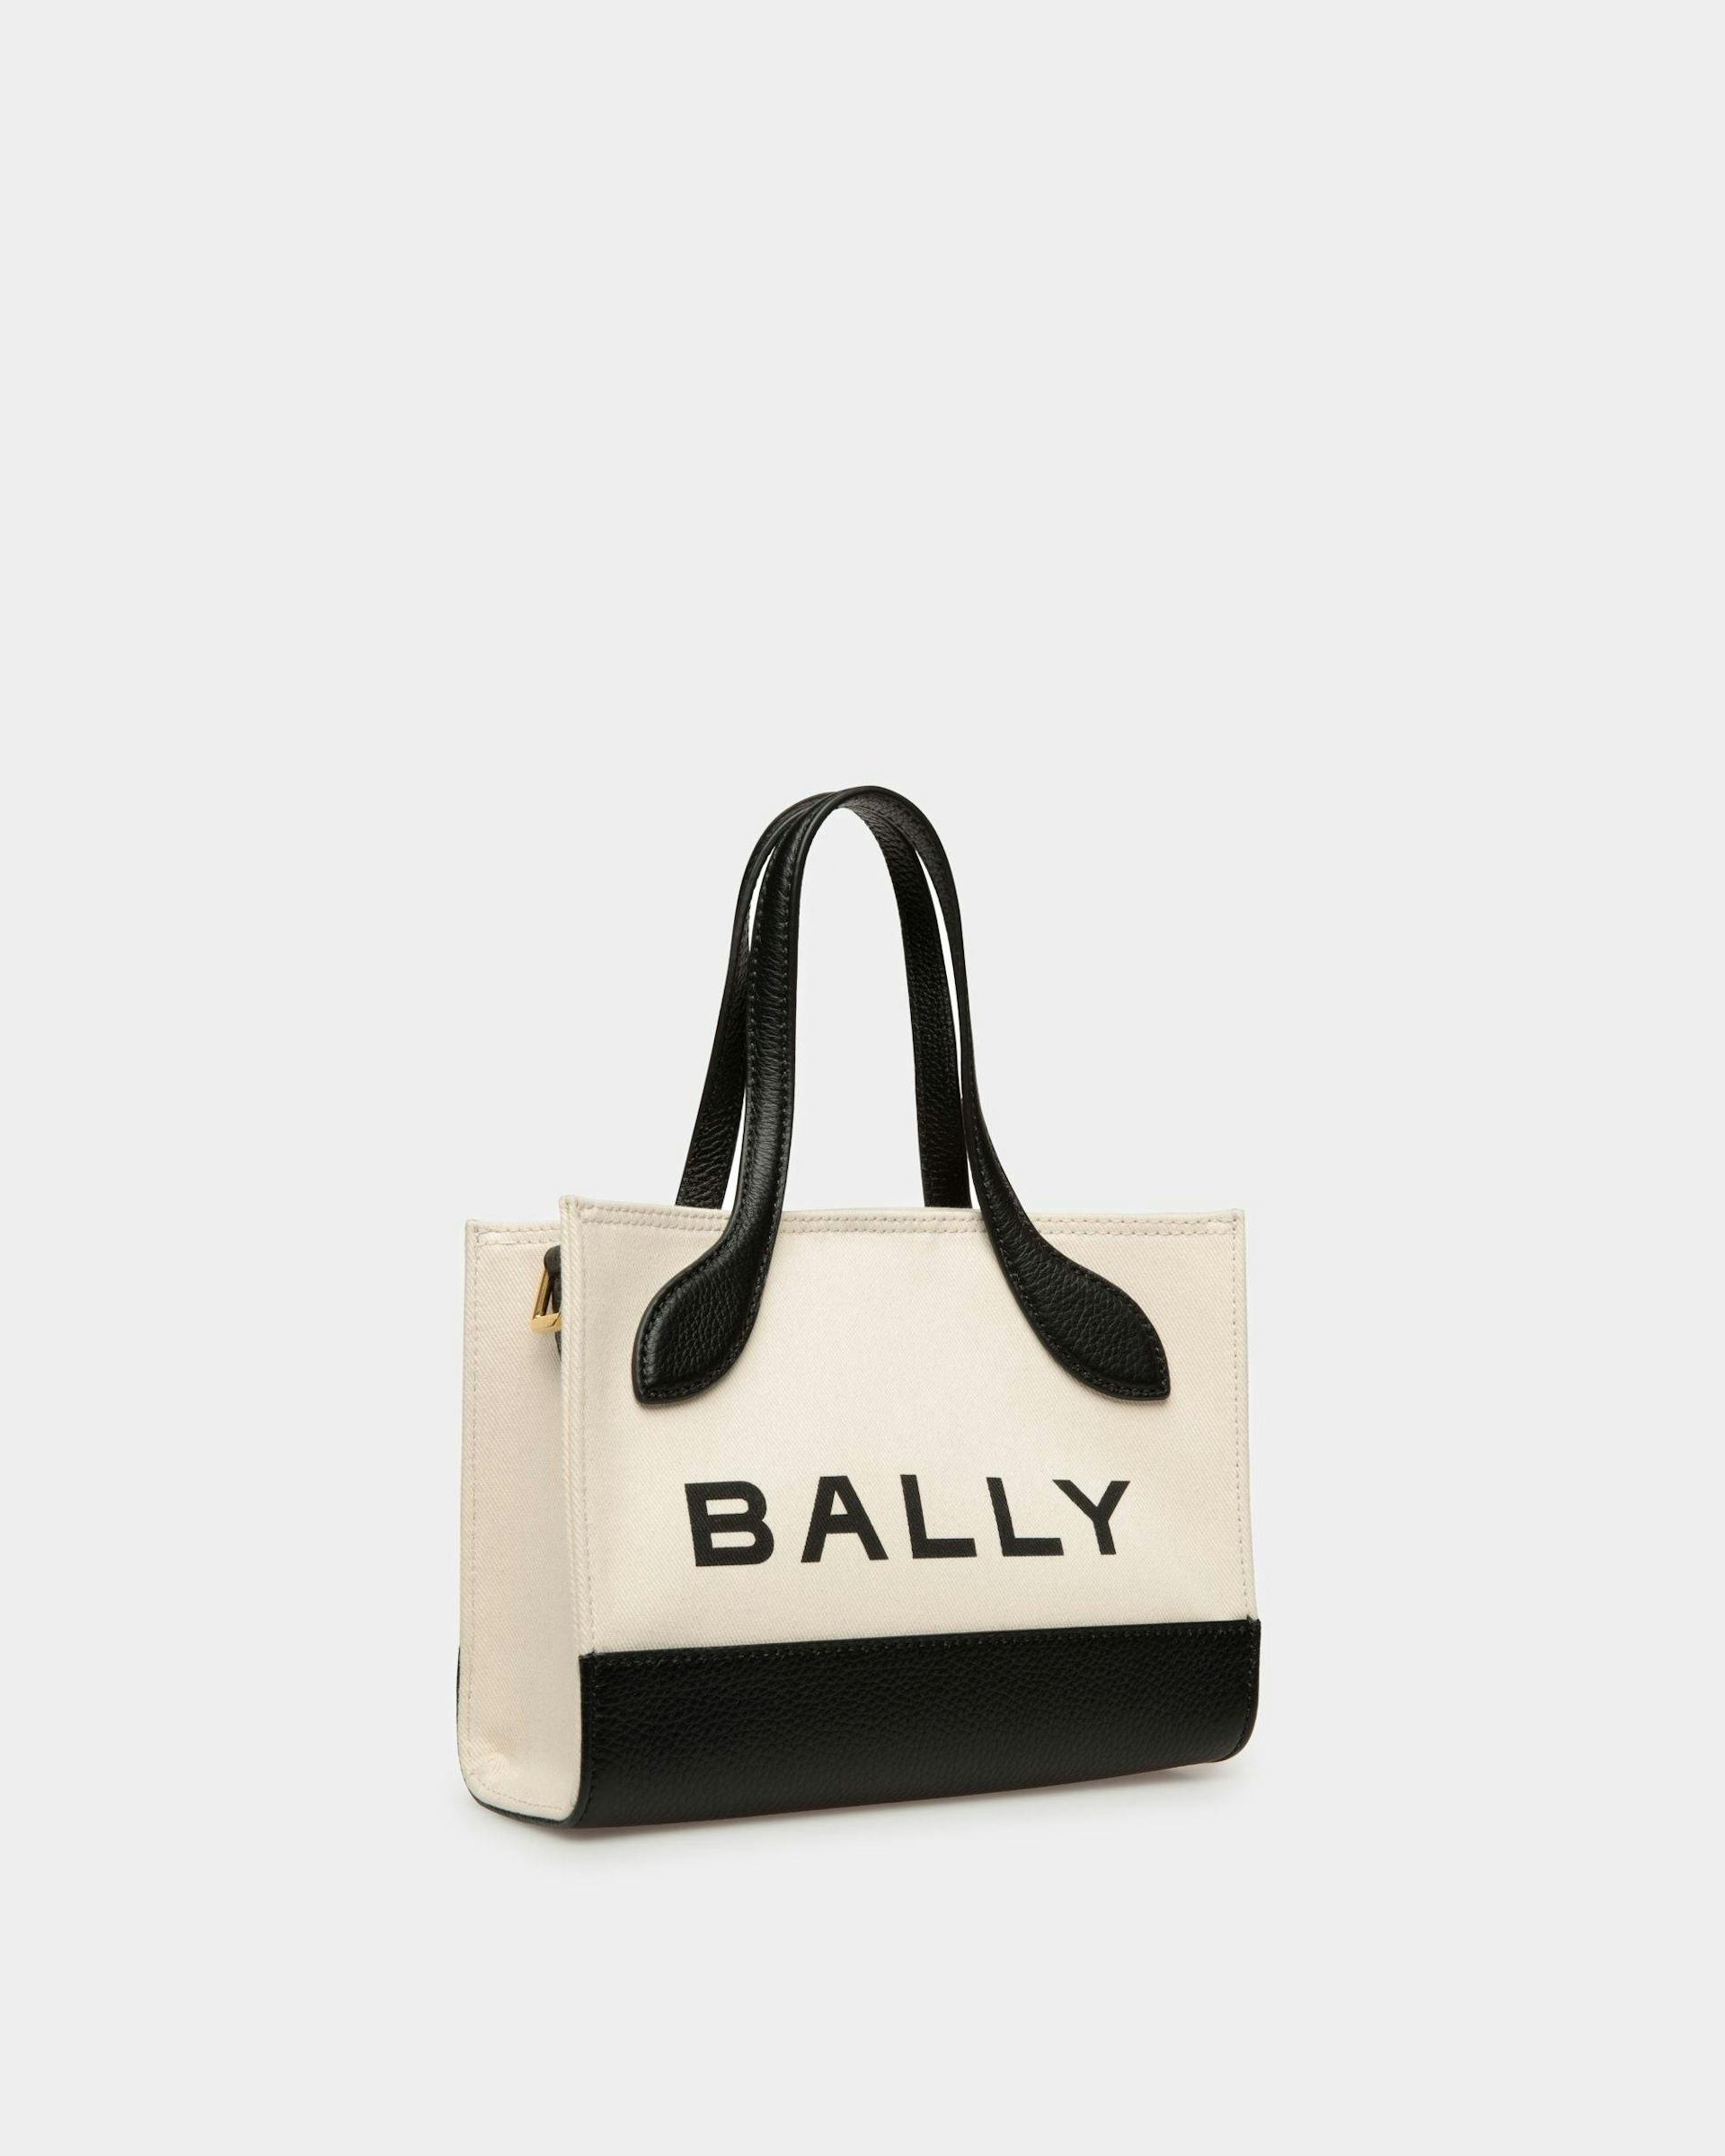 Women's Bar Minibag In Natural And Black Fabric | Bally | Still Life 3/4 Front